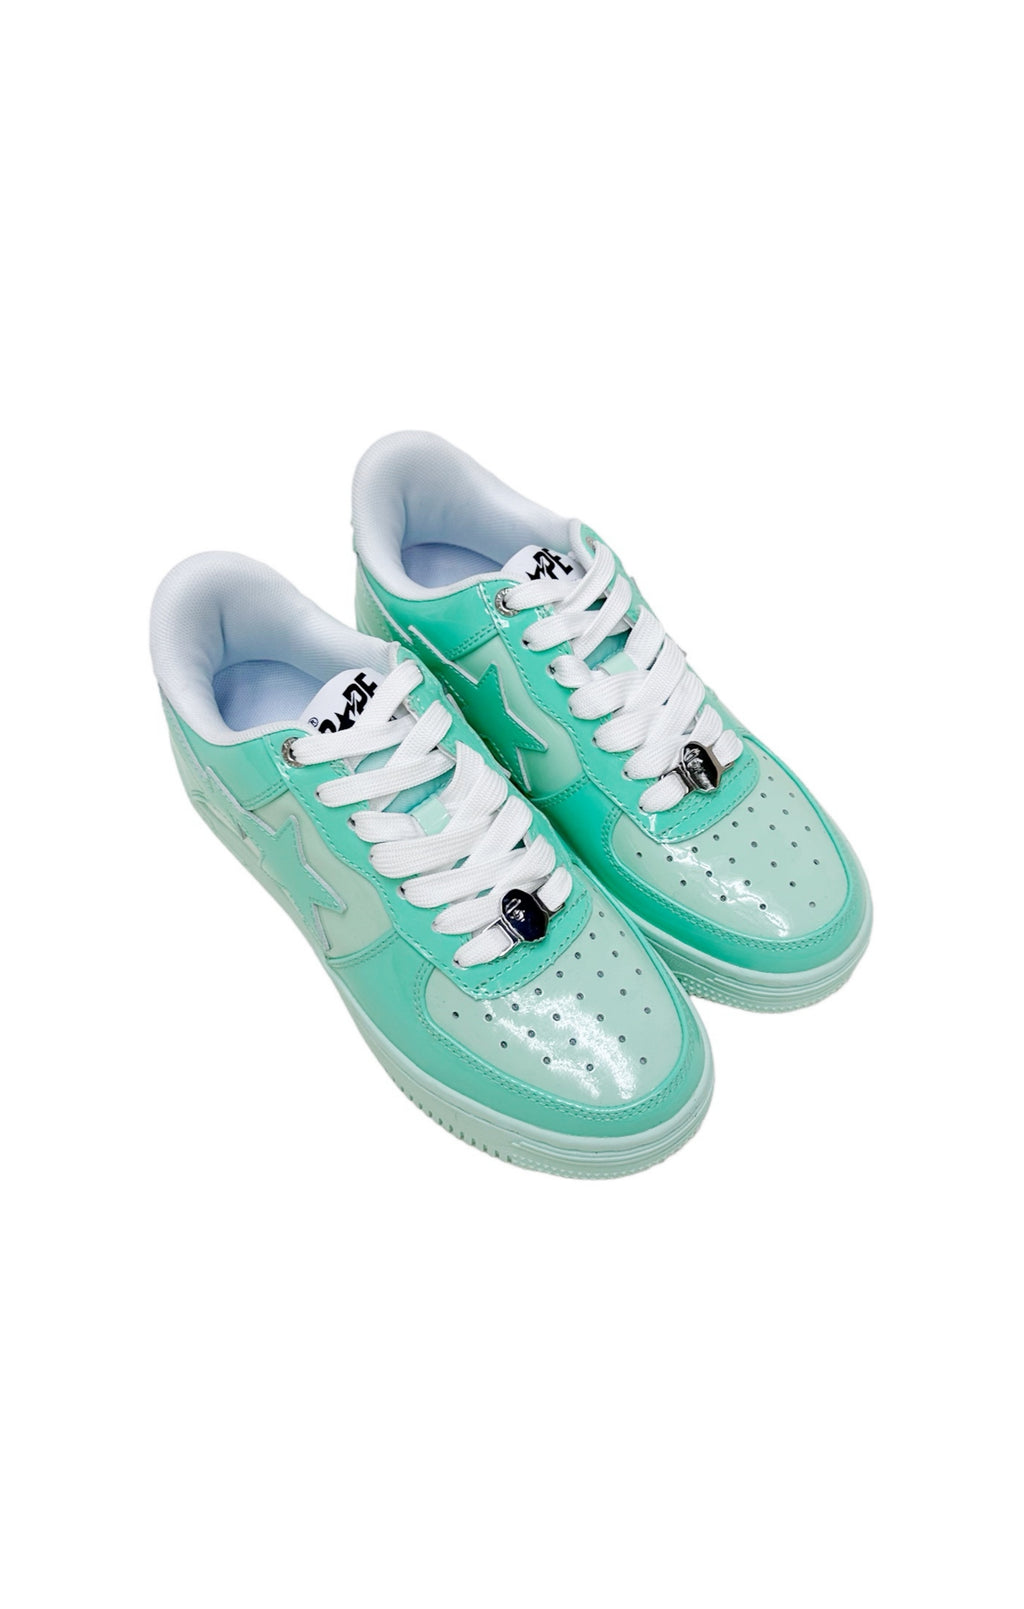 BAPE (NEW) Sneakers Size: Womens US 5